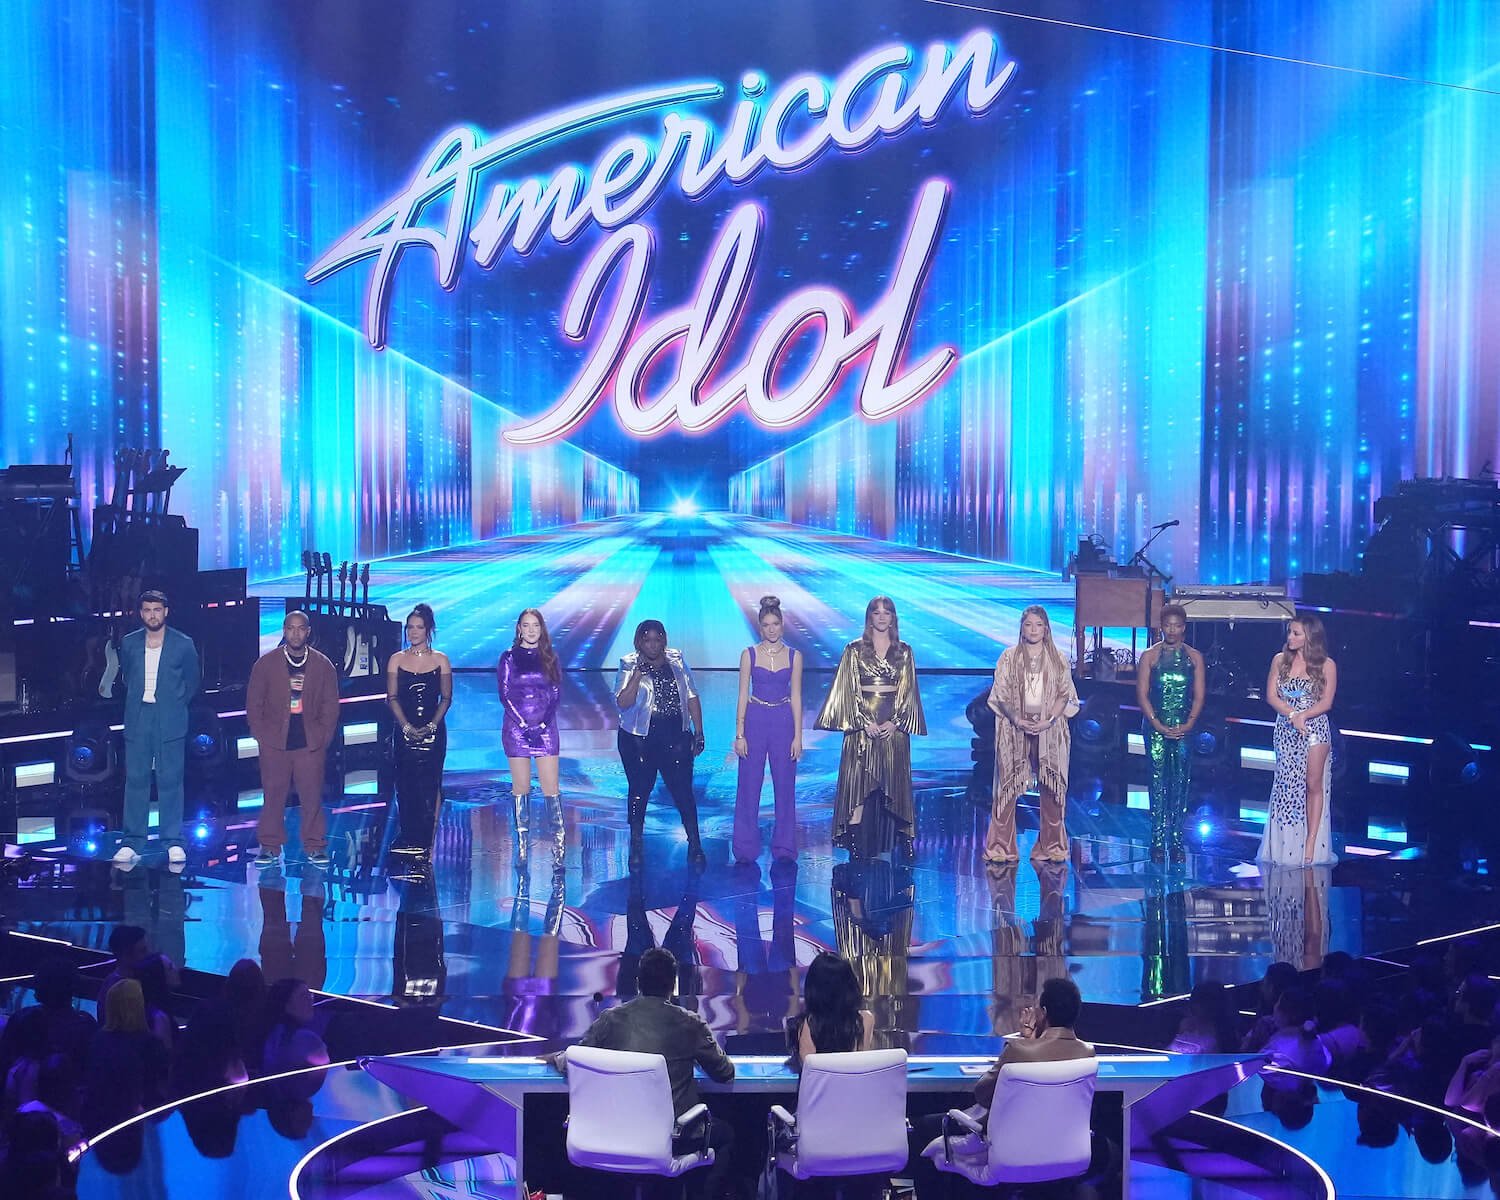 'American Idol' 2023 Schedule When Are the Top 10 Revealed?